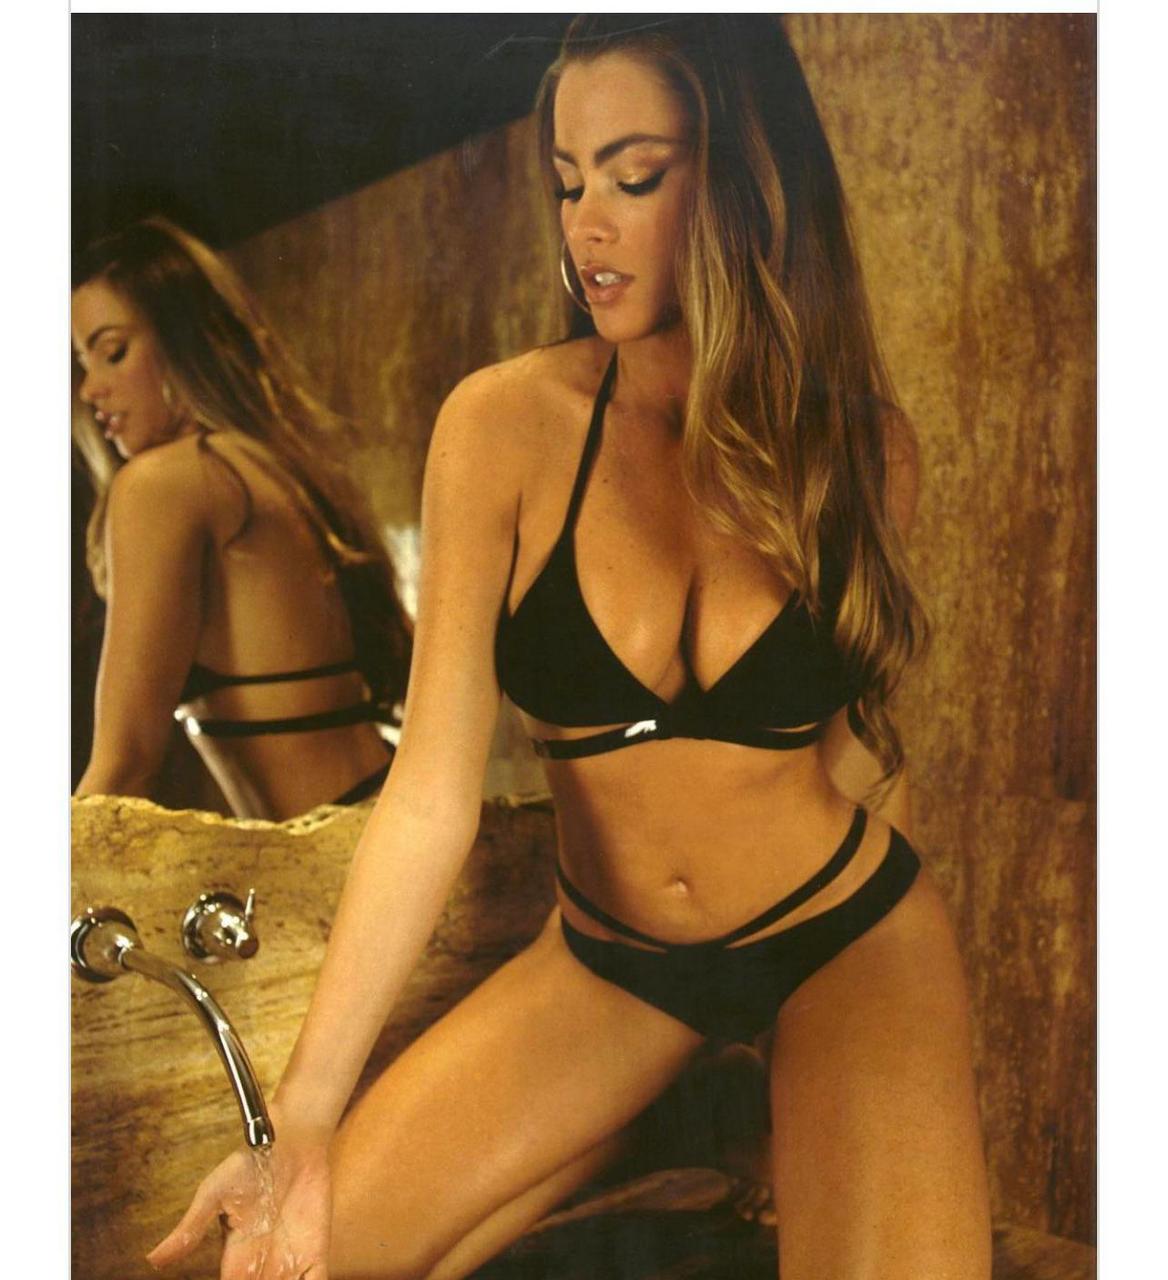 Its Crazy To Think Sofia Vergara 49 Still To This Day Gets Me To My Hardest NSFW